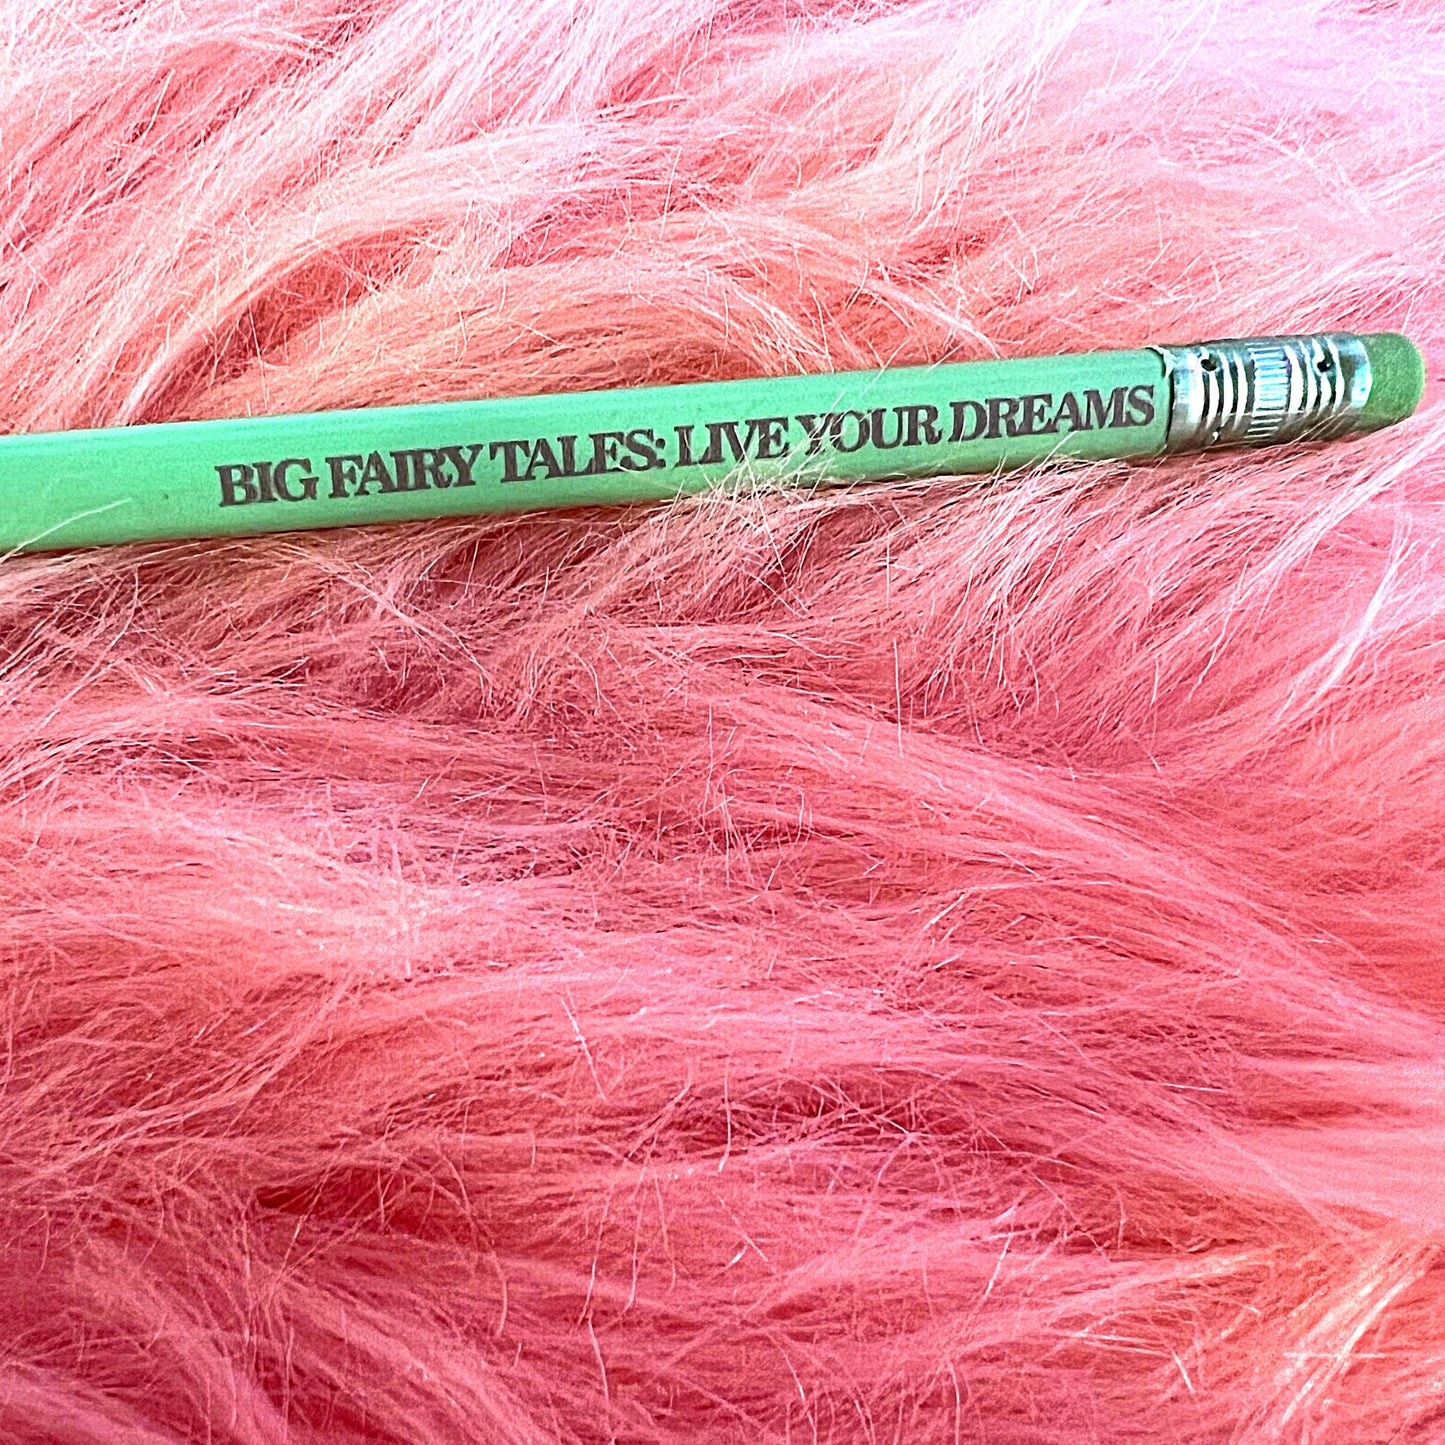 Dreamy Pastel Pencil In Green From Big Fairy Tales By Schatar